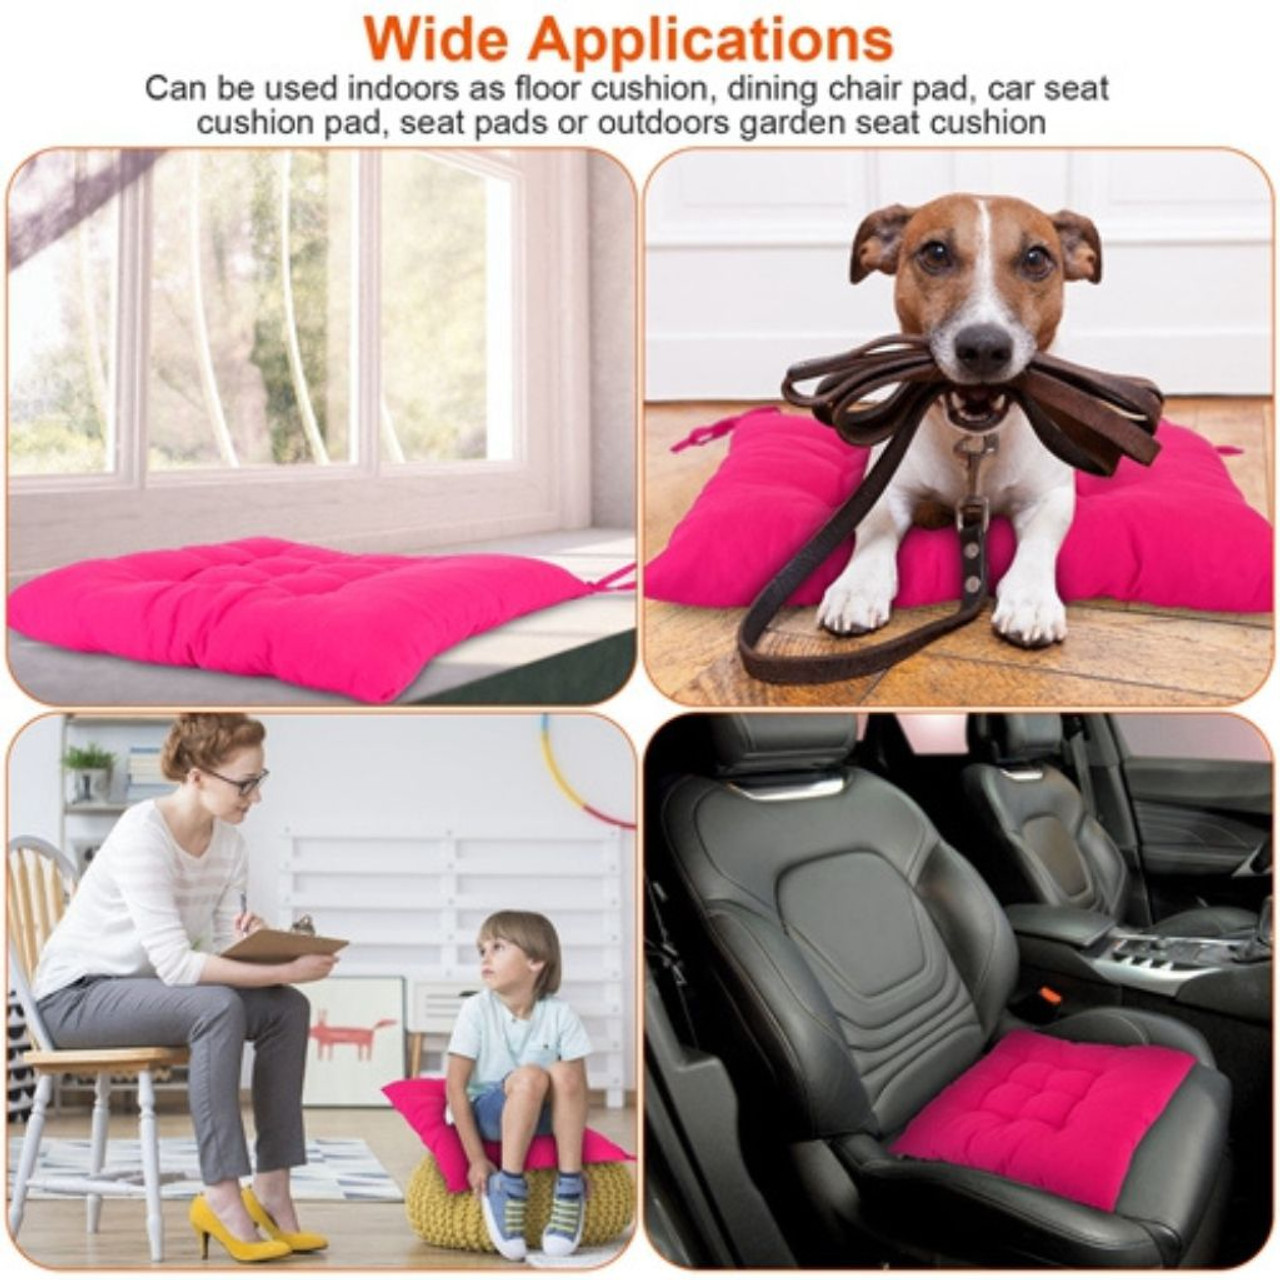 Chair Cushion Pads (Set of 4) product image